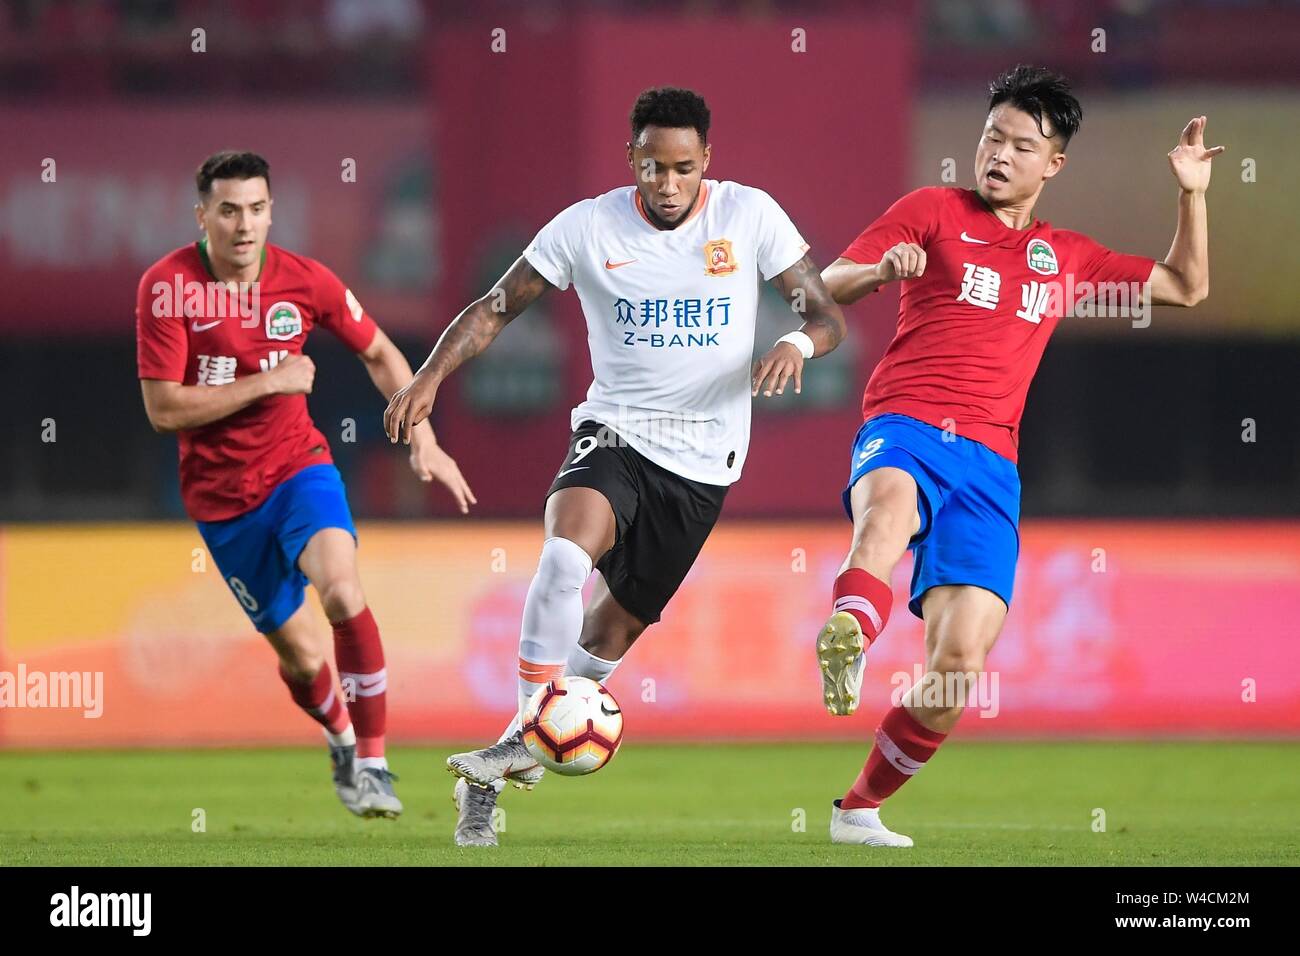 Brazilian football player Rafael Pereira da Silva, commonly known as Rafael or Rafael da Silva, middle, of Wuhan Zall F.C. keeps the ball during the 19th round of Chinese Football Association Super League (CSL) against Henan Jianye in Zhengzhou, central China’s Henan province on 21 July 2019. The match ened with a draw 0-0. Stock Photo